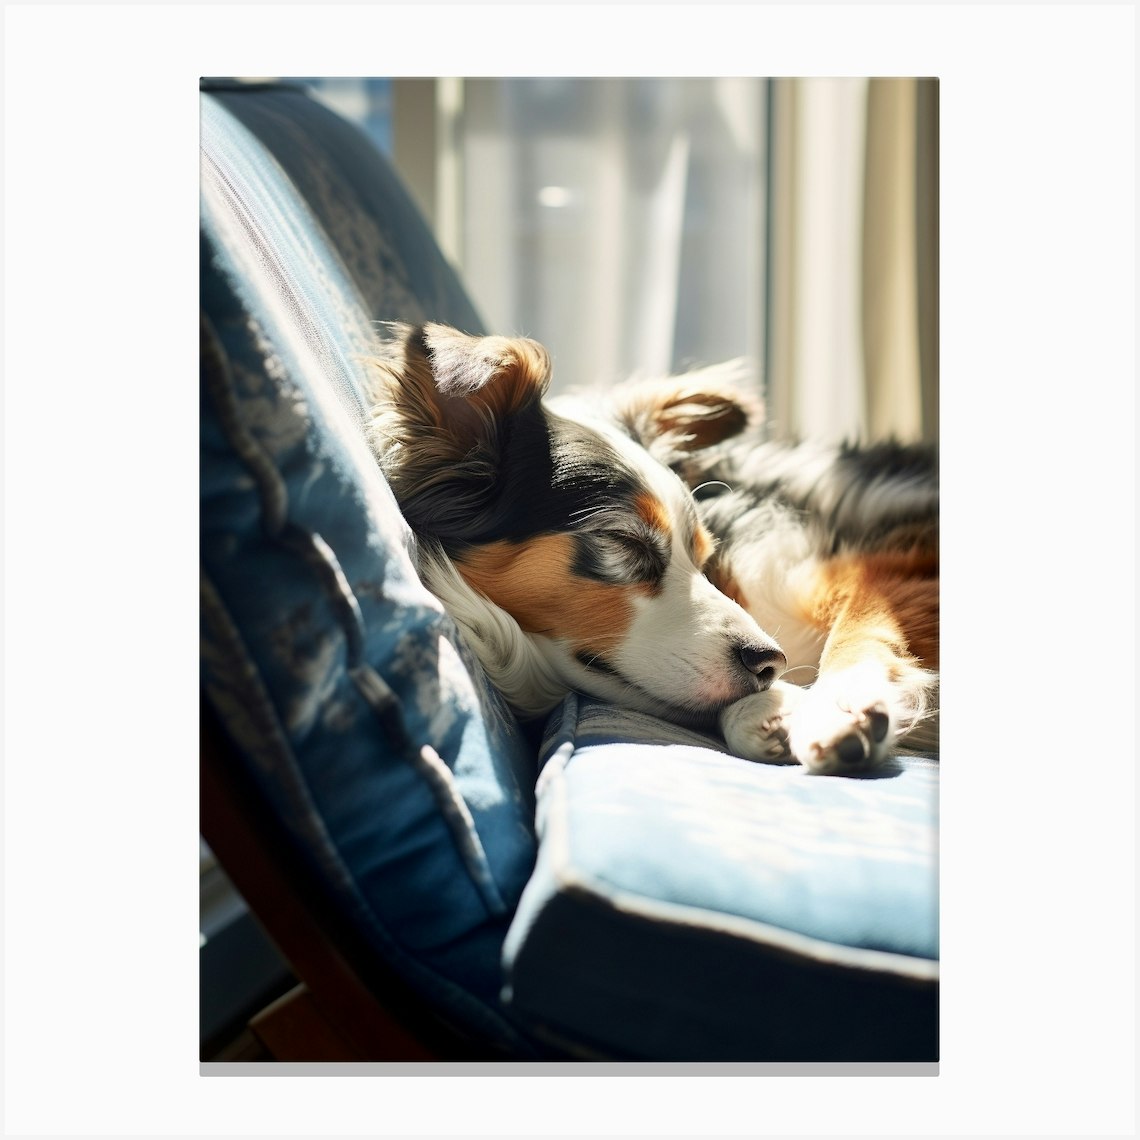 Dog Sleeping On A Chair Canvas Print by Mechelle Flowers - Fy